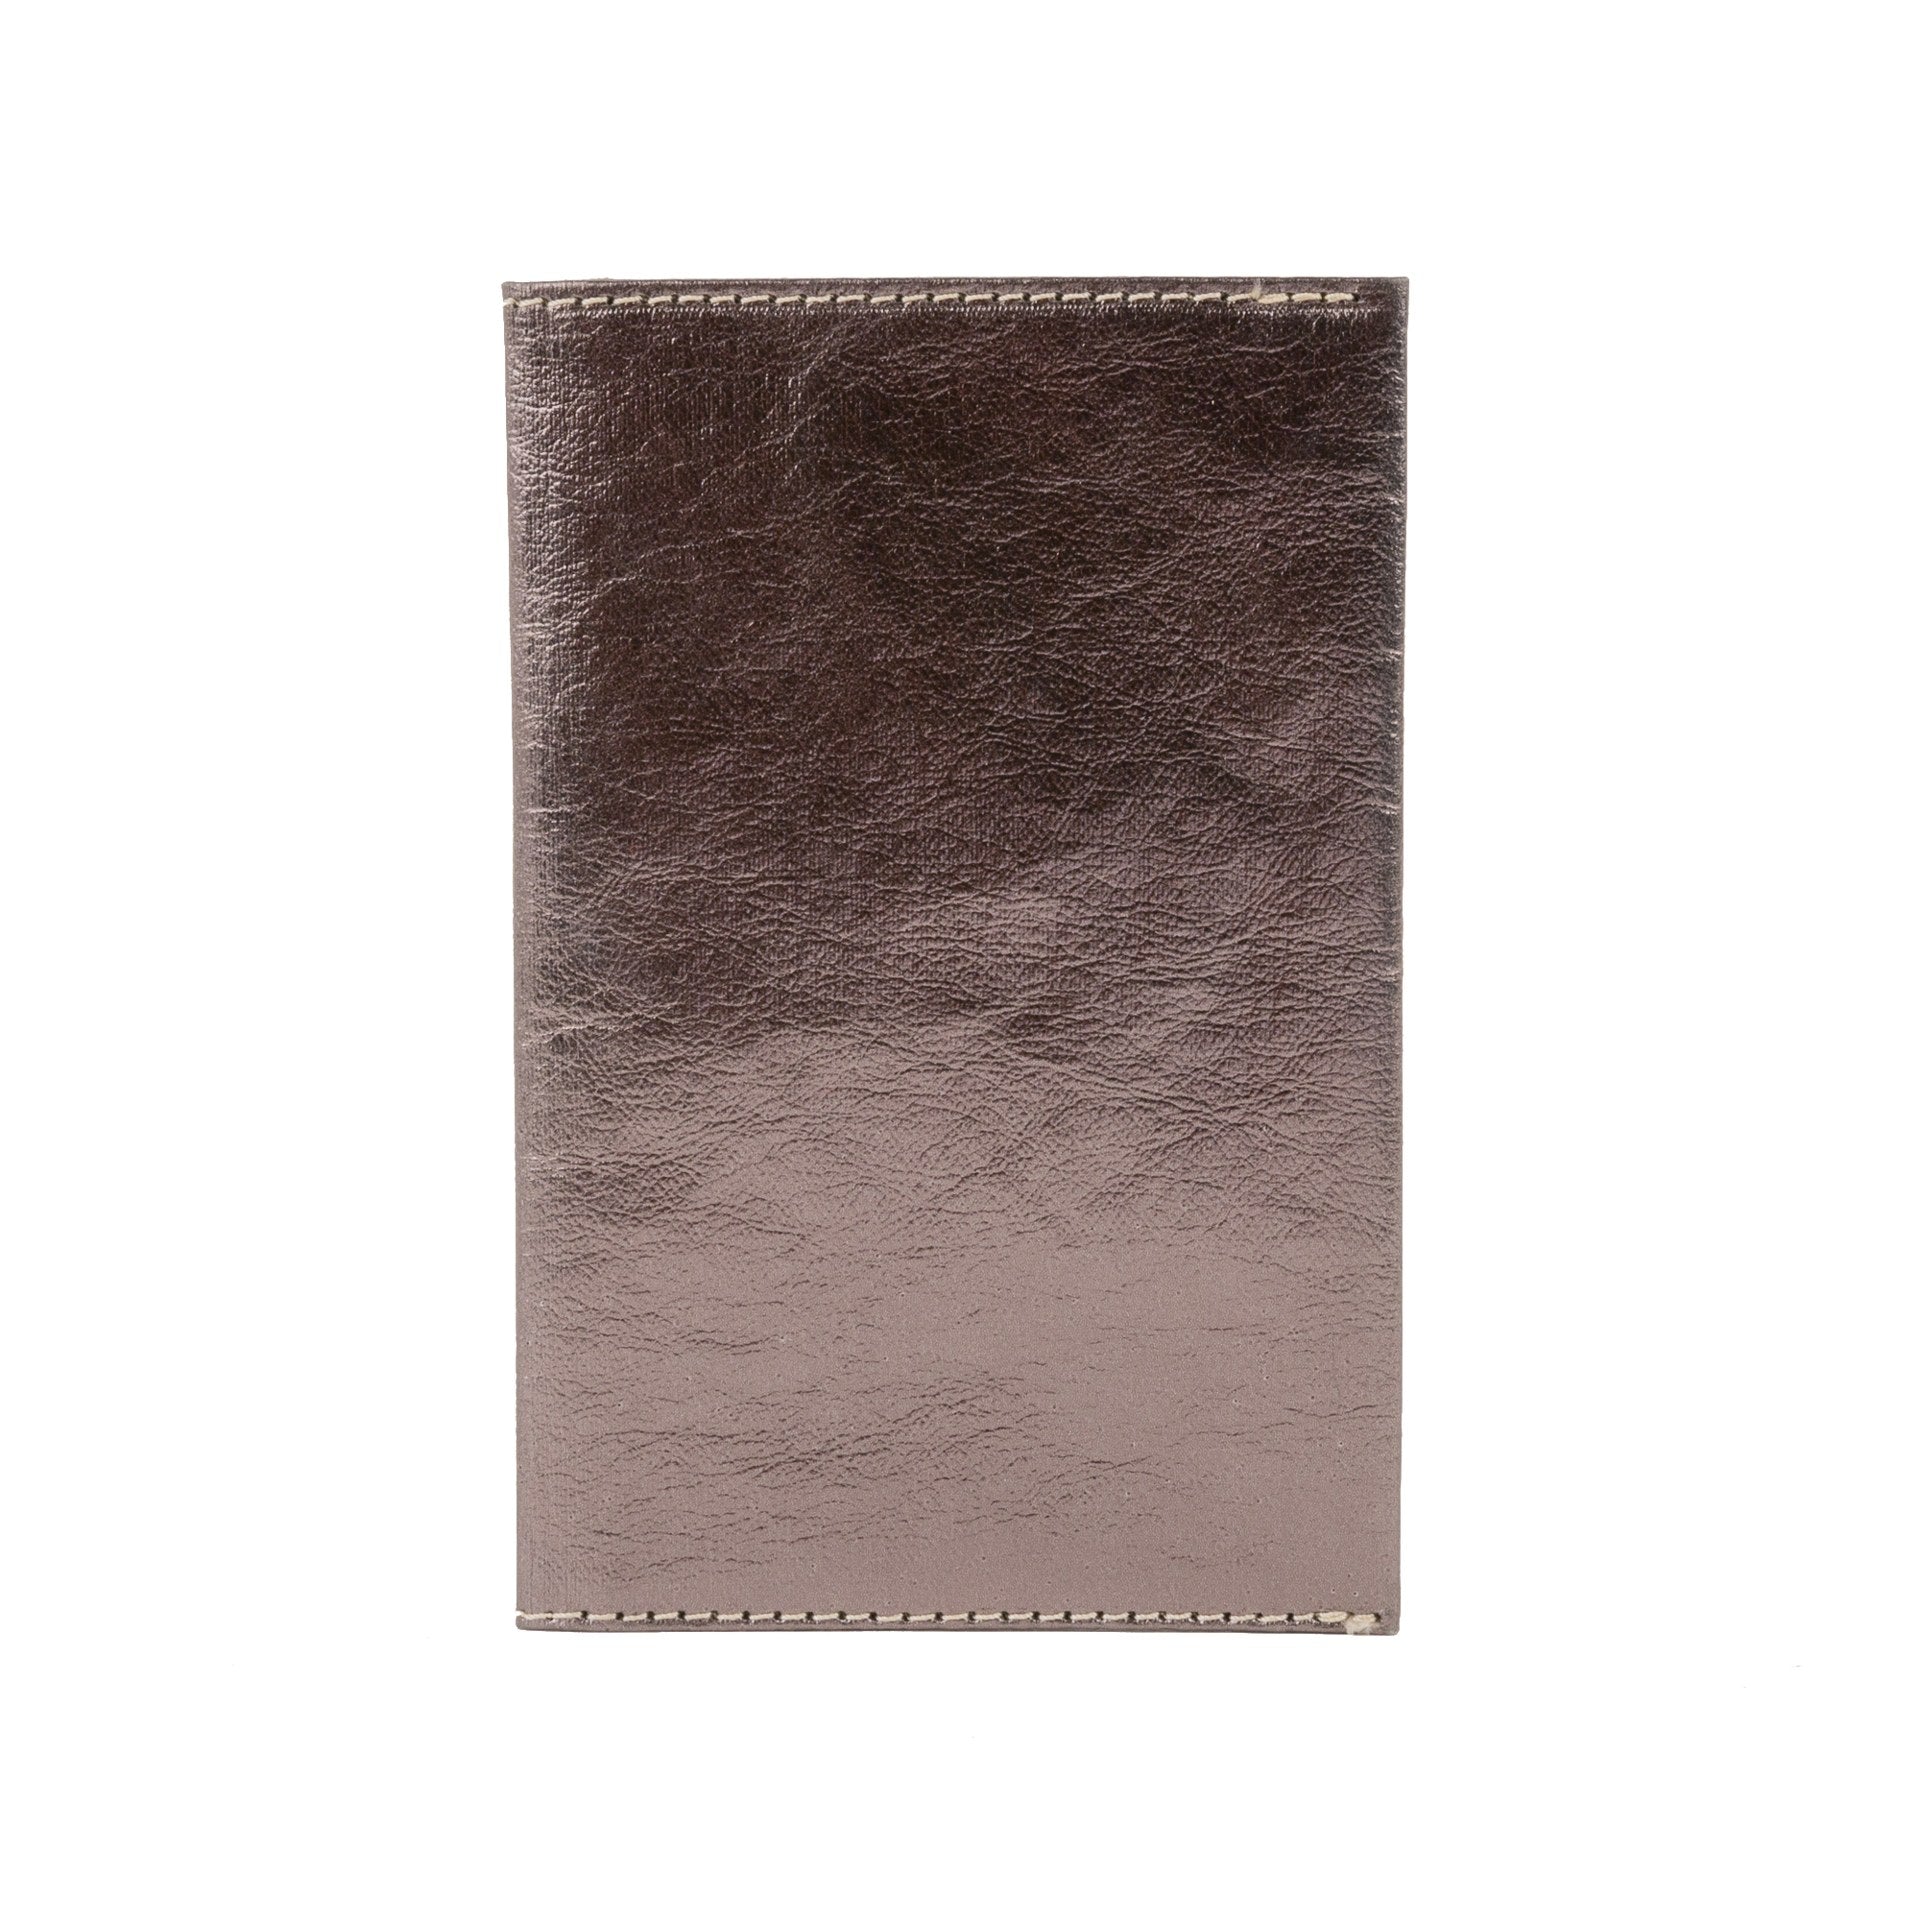 A large washable paper wallet is shown folded closed. The wallet is dark grey metallic.